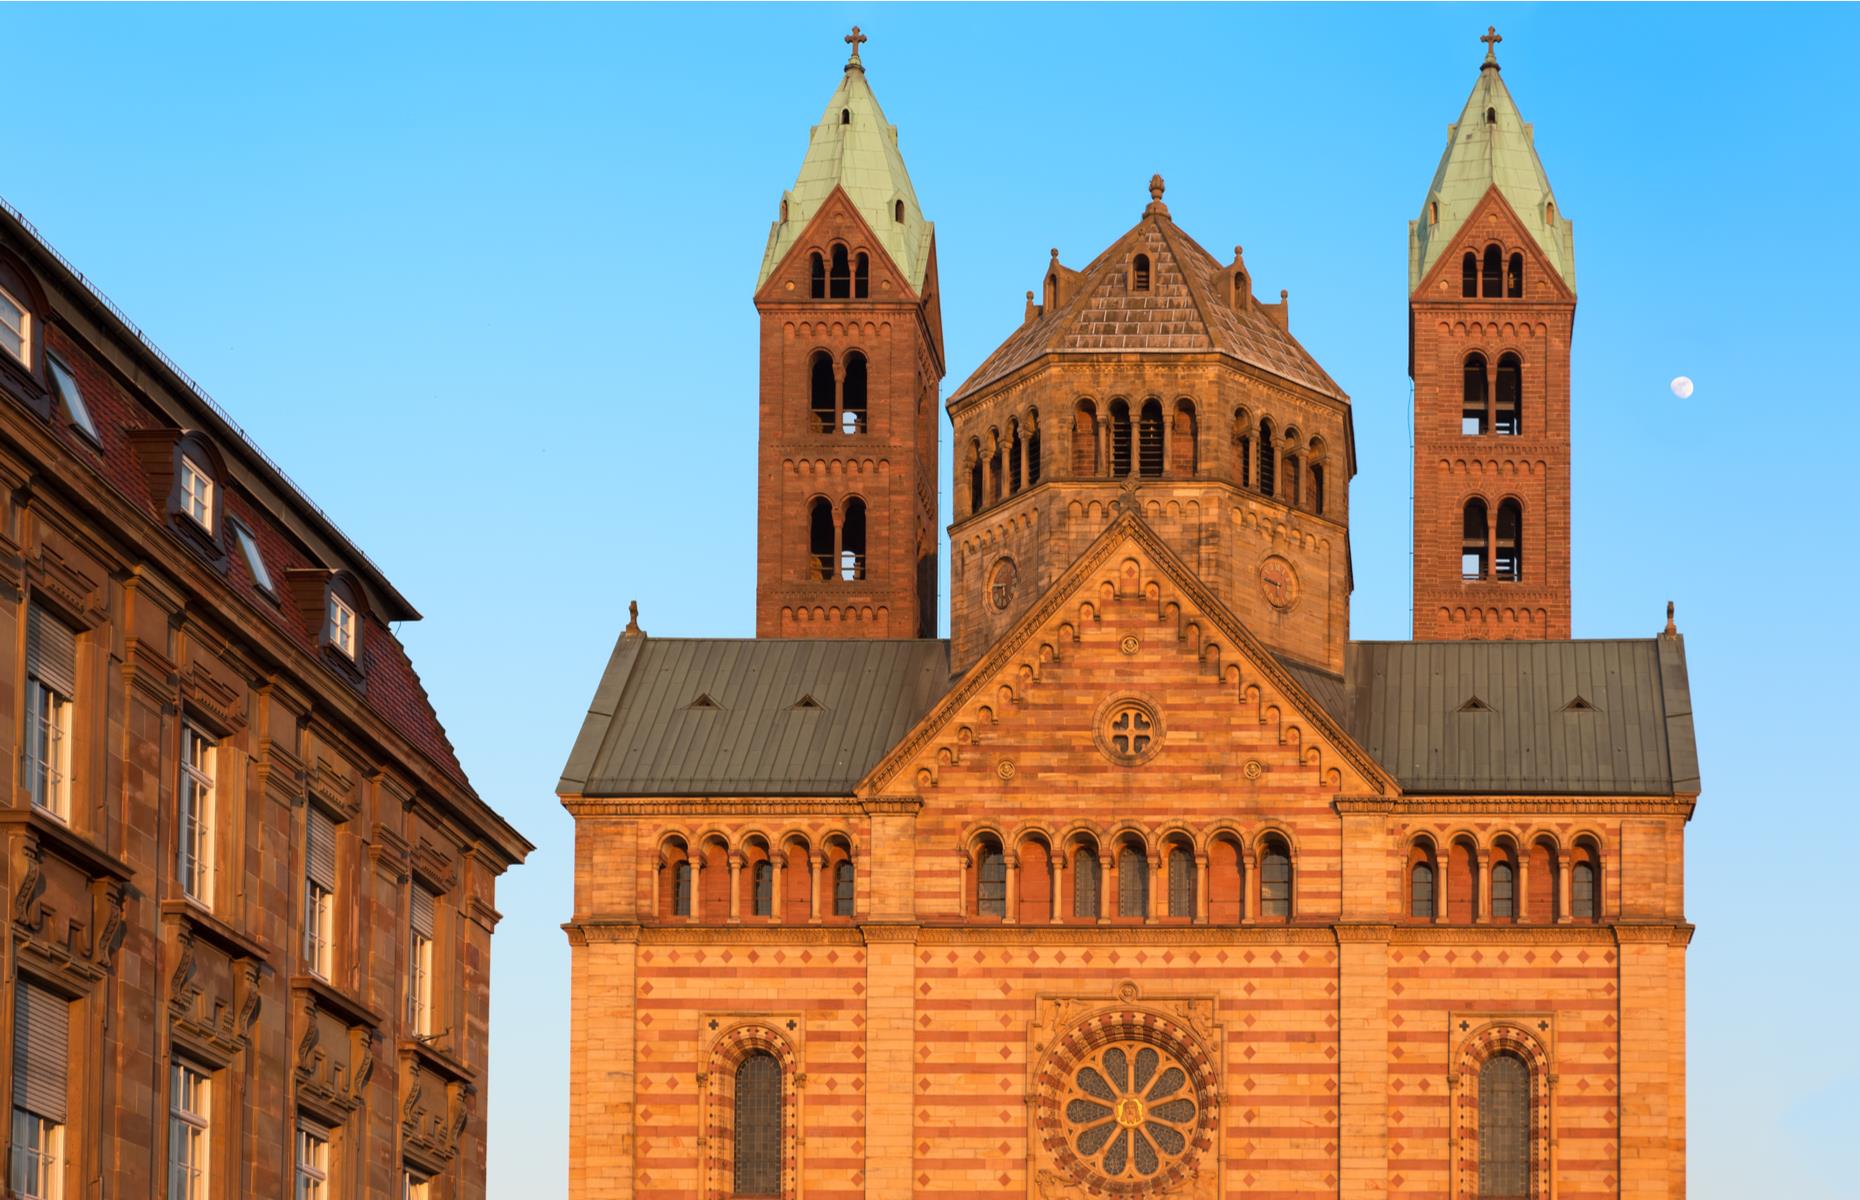 <p>German emperors were buried at <a href="http://whc.unesco.org/en/list/168">Speyer Cathedral</a> for almost 300 years from the late 11th century, which gives some idea as to its importance. It’s also the largest Romanesque church in the world, having been extended from a flat-ceilinged basilica to a grand vaulted structure in 1077. The significance of the church goes beyond its size, though. Its groundbreaking design, from the gallery that encircles the building to the series of arcades, was hugely influential on European architecture.</p>